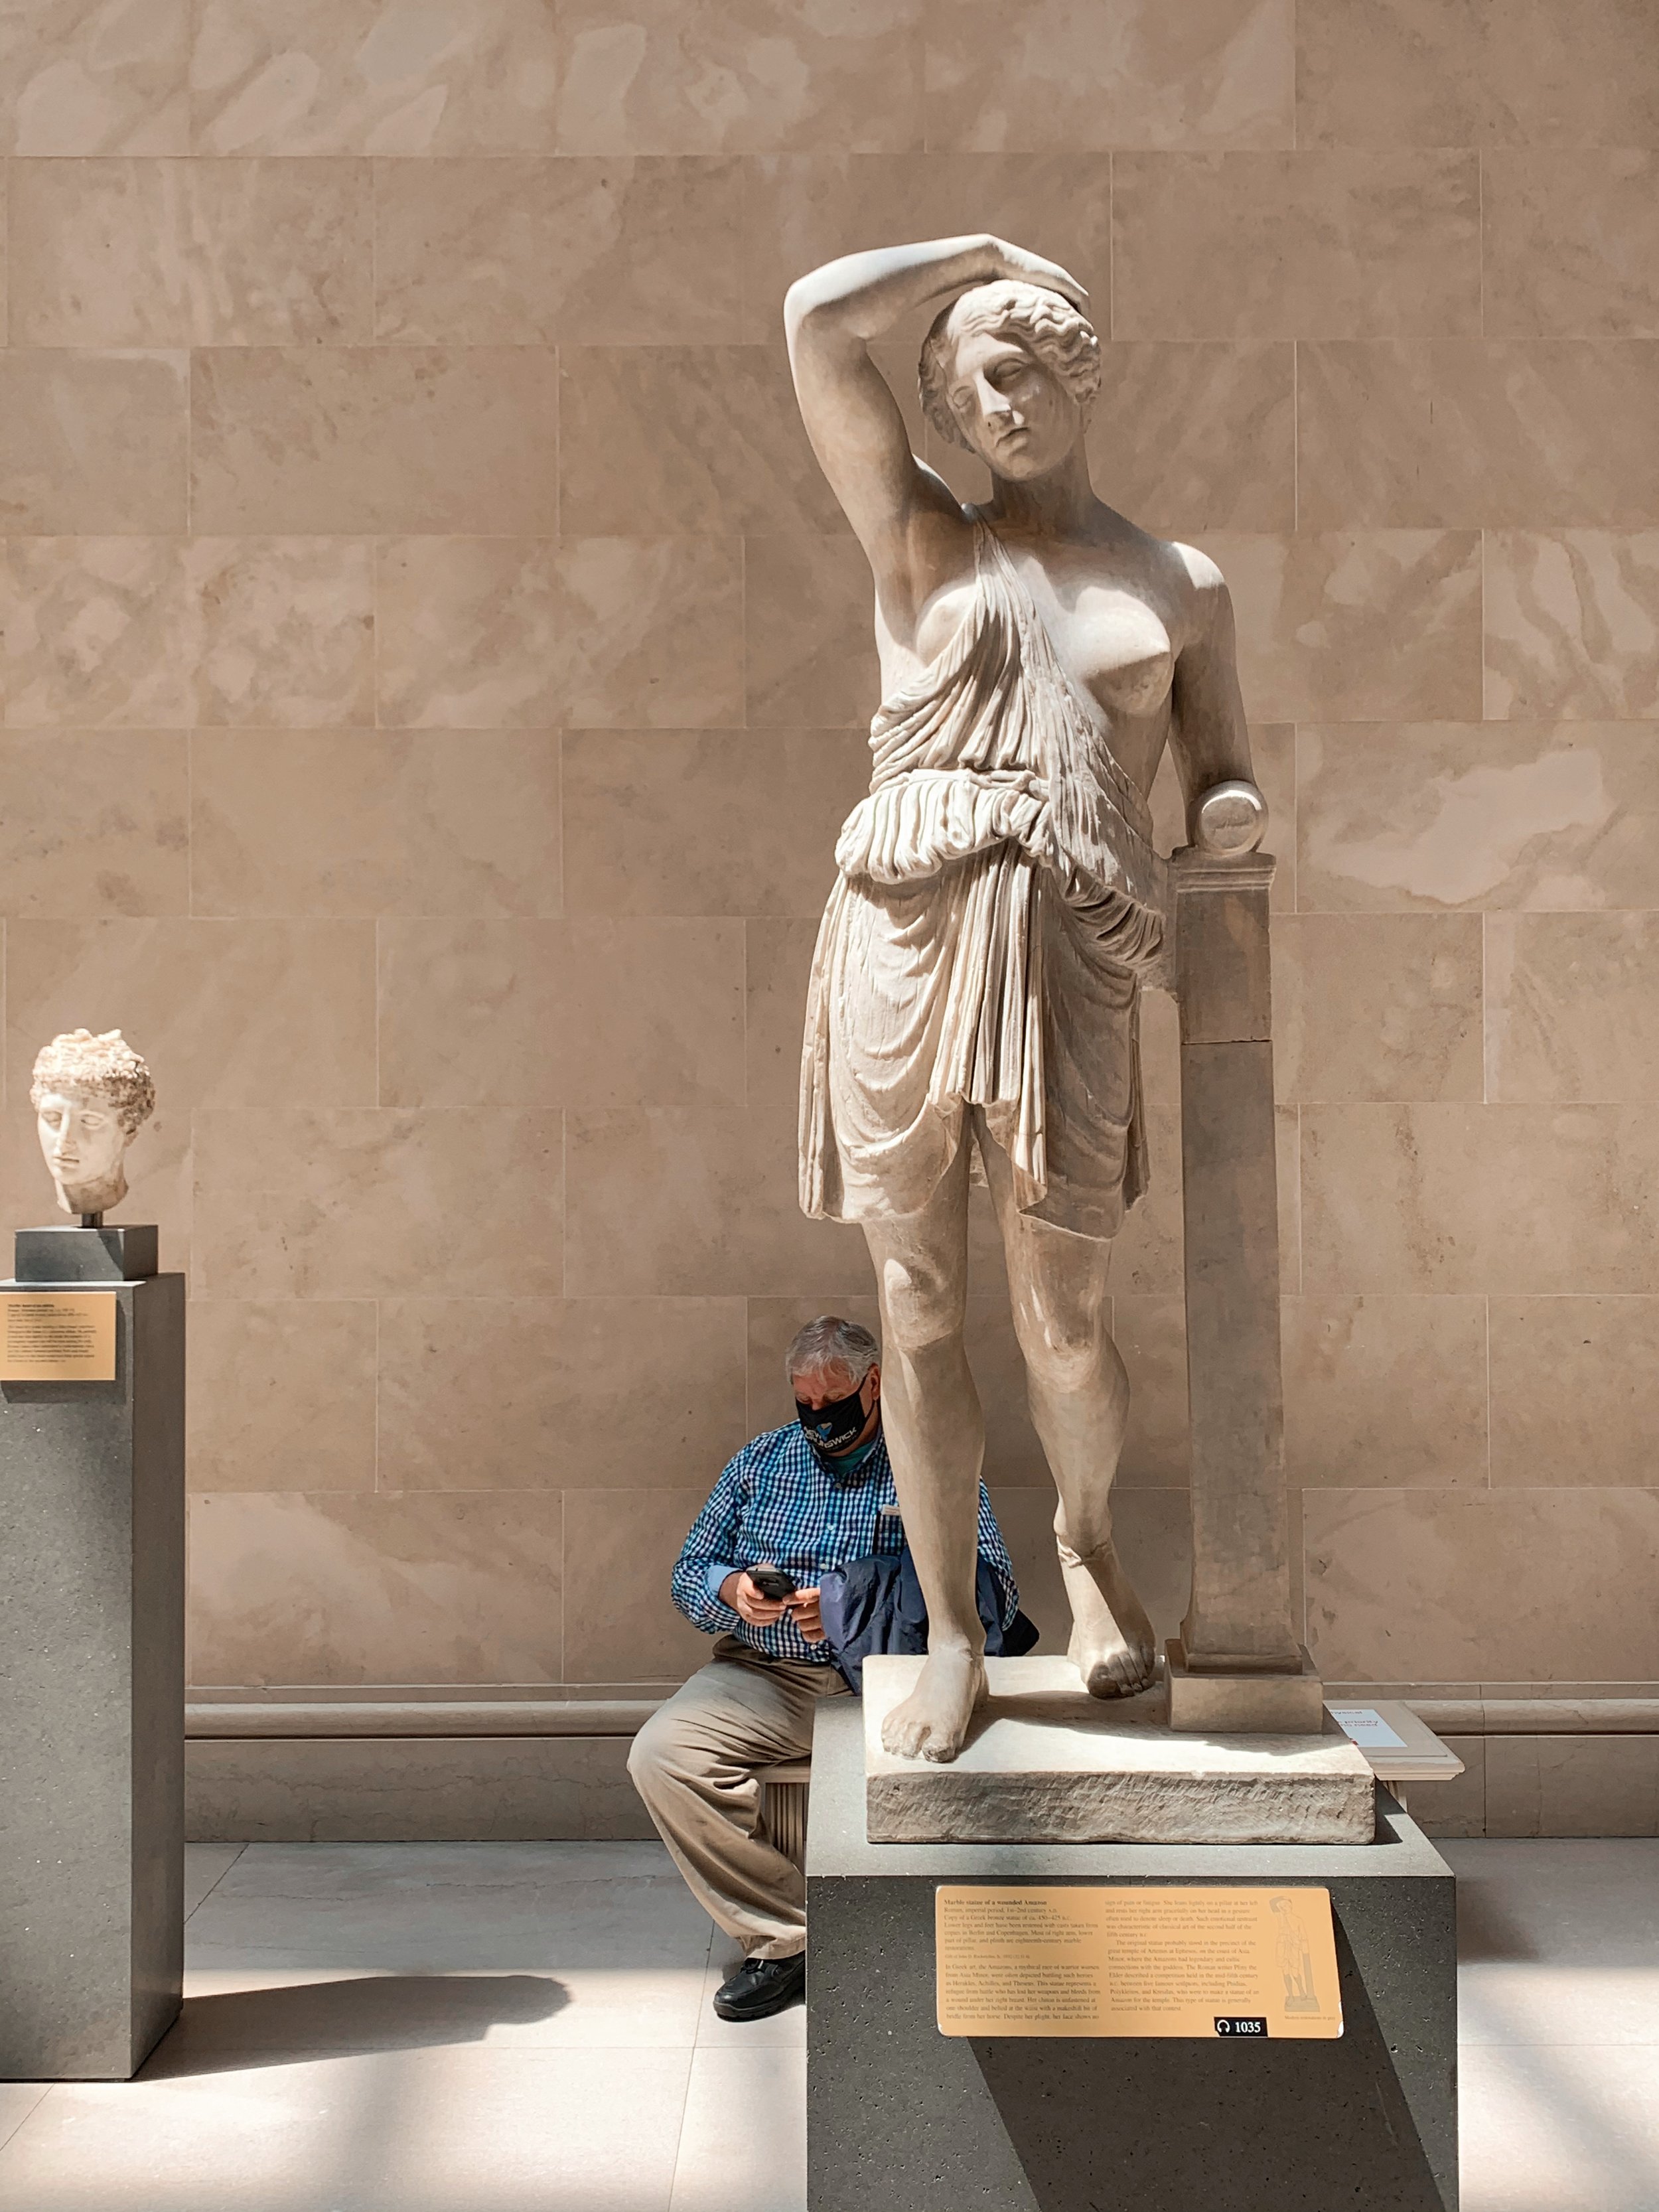 Marble statue of a wounded , Roman, Imperial